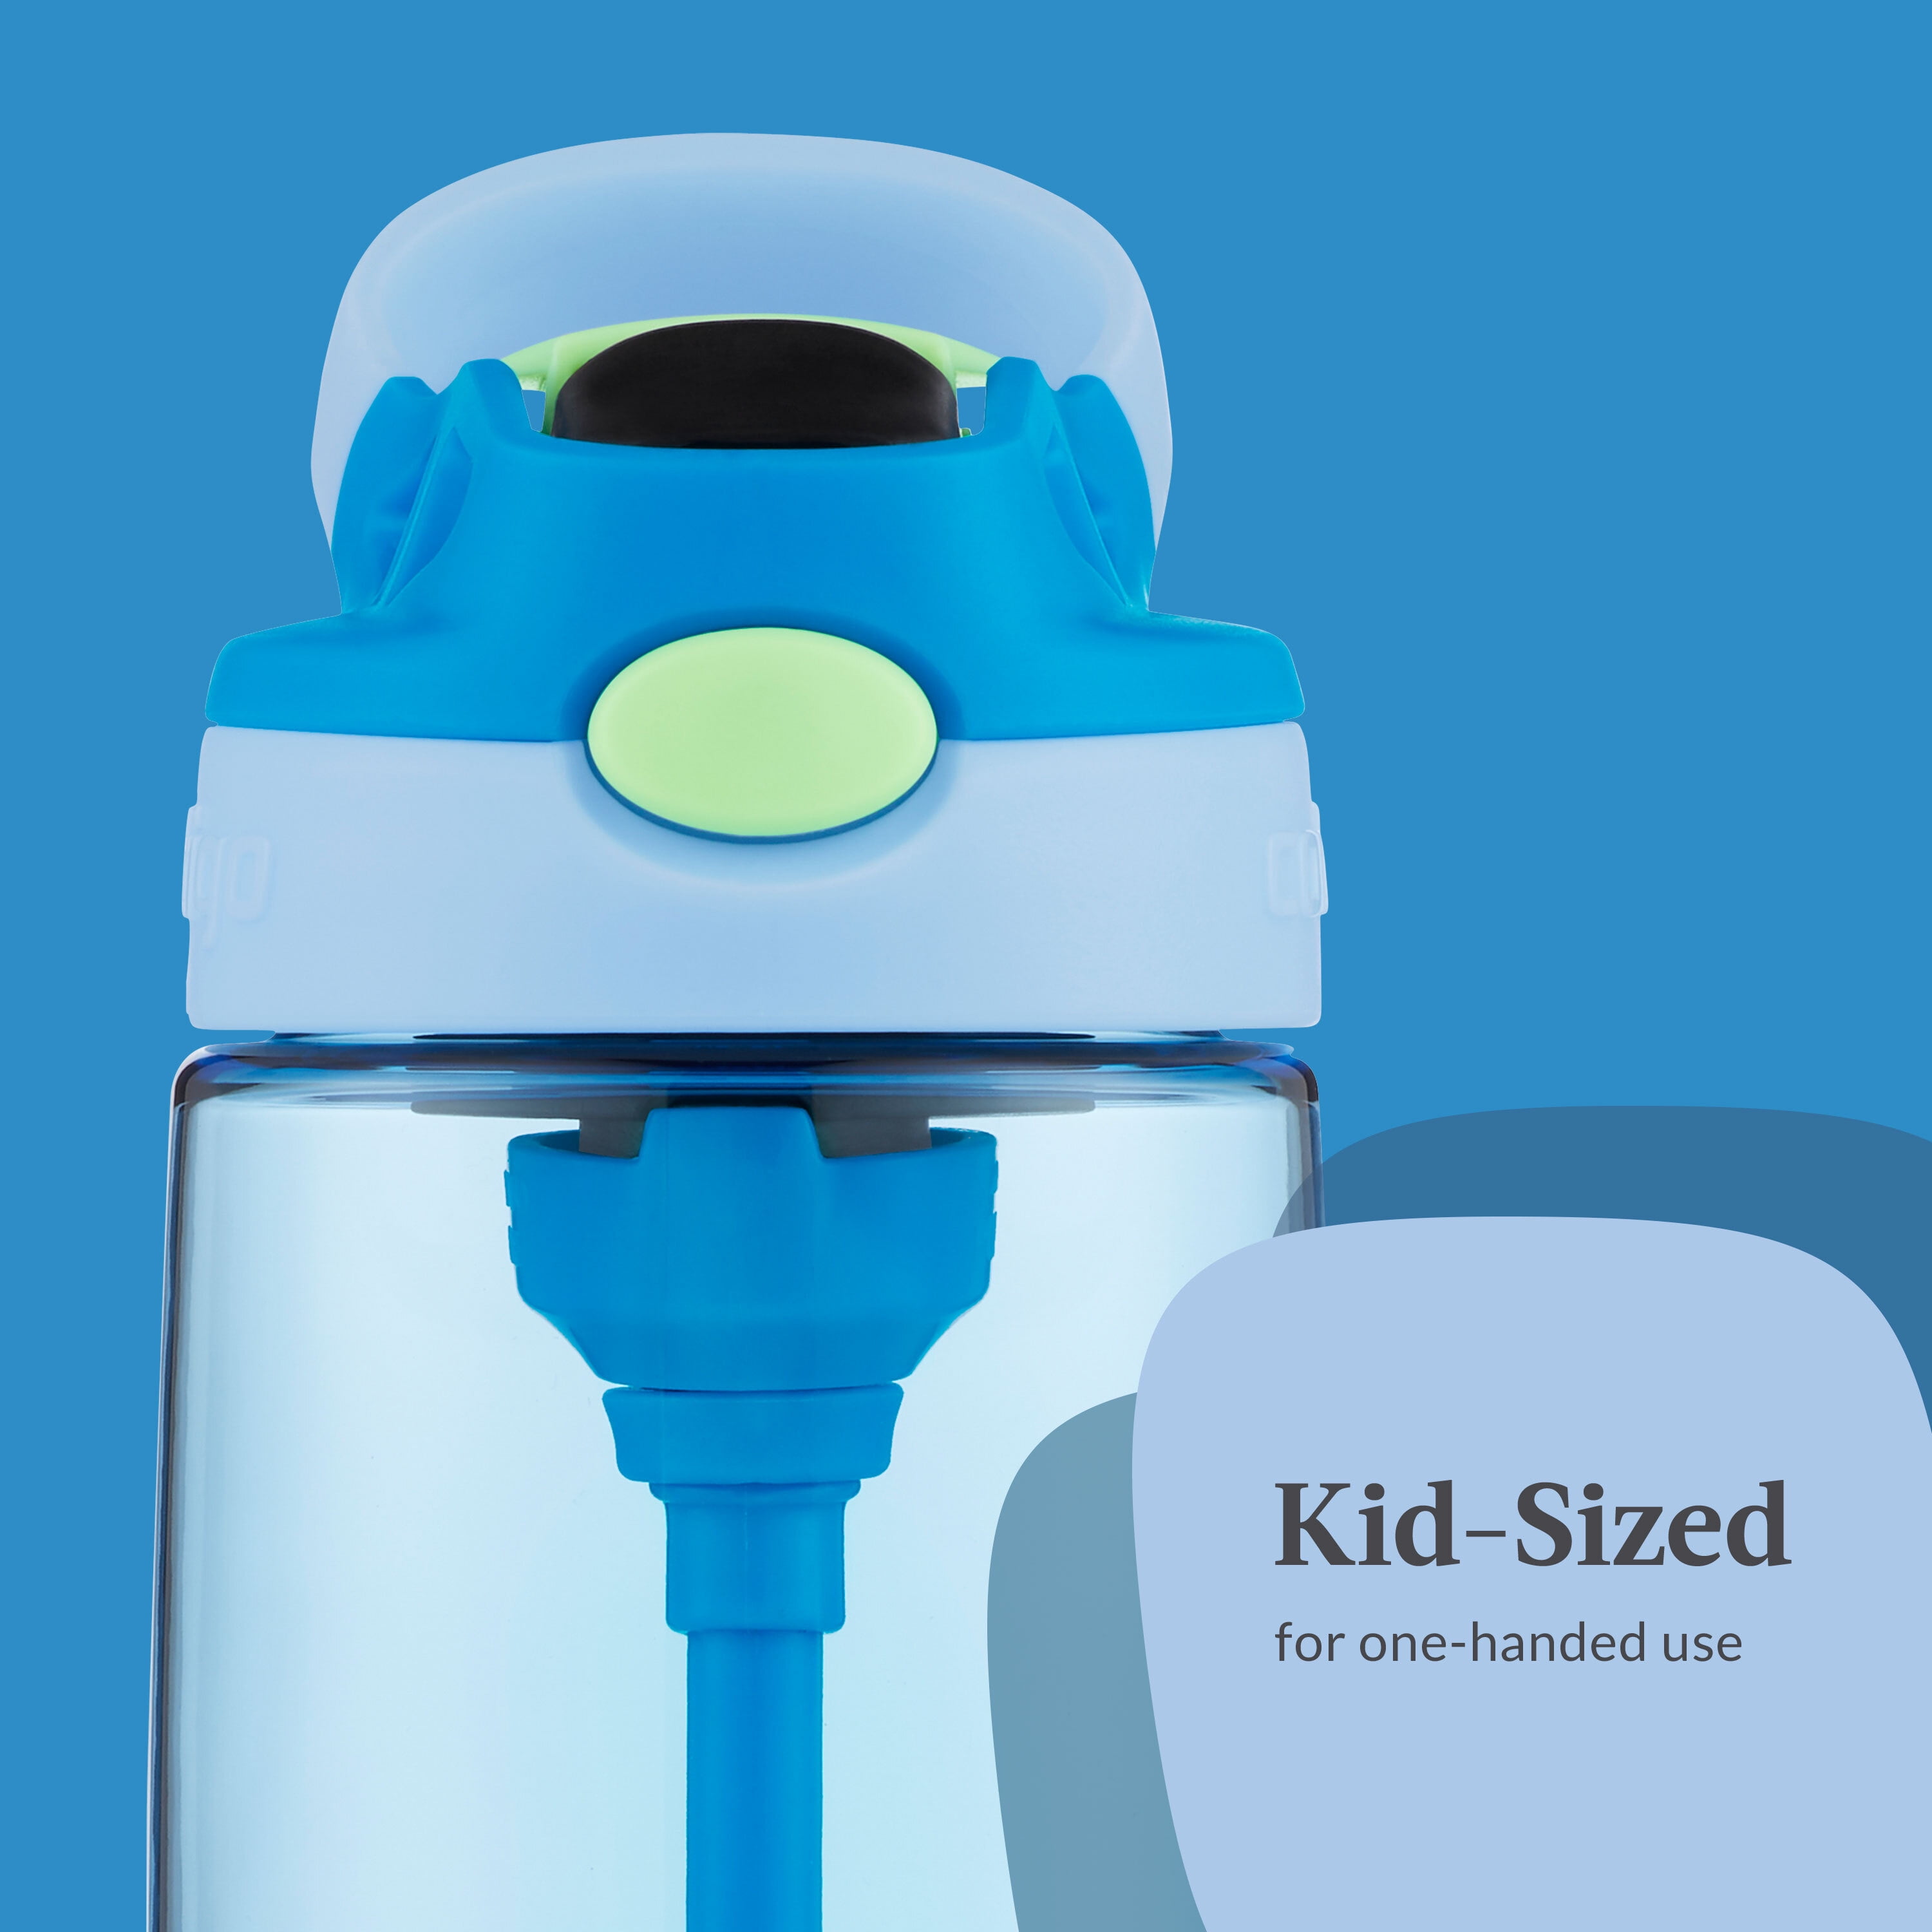 Contigo - As a leading innovator of water bottles, travel mugs and kids  bottles, Contigo® puts safety and quality first. As part of our commitment  to consumer safety, Contigo®, in partnership with